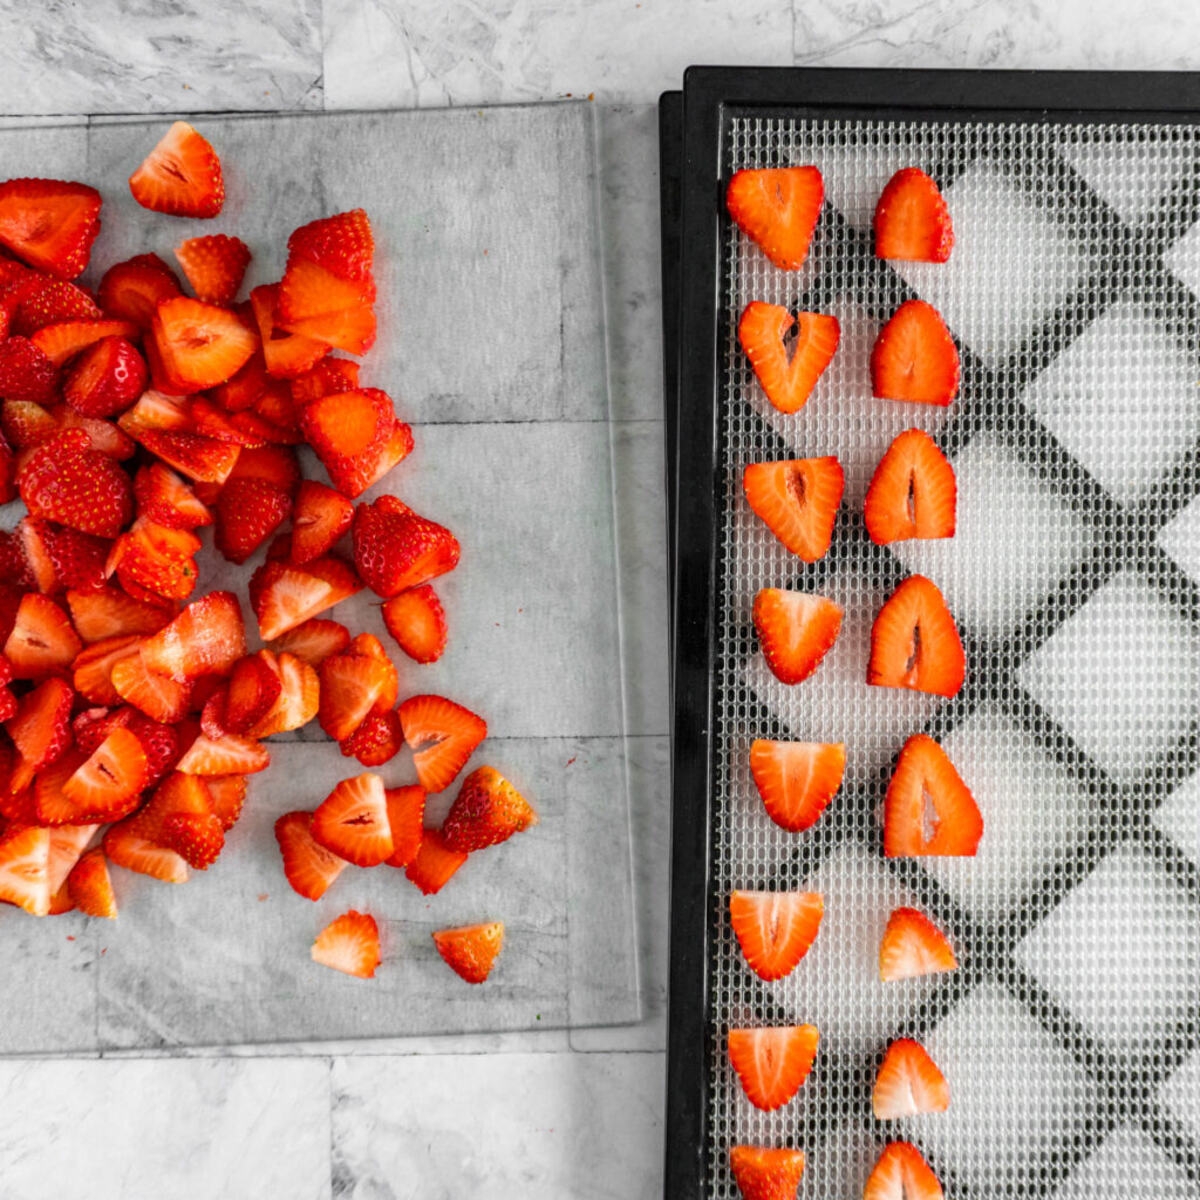 How To Dehydrate Strawberries In A Dehydrator